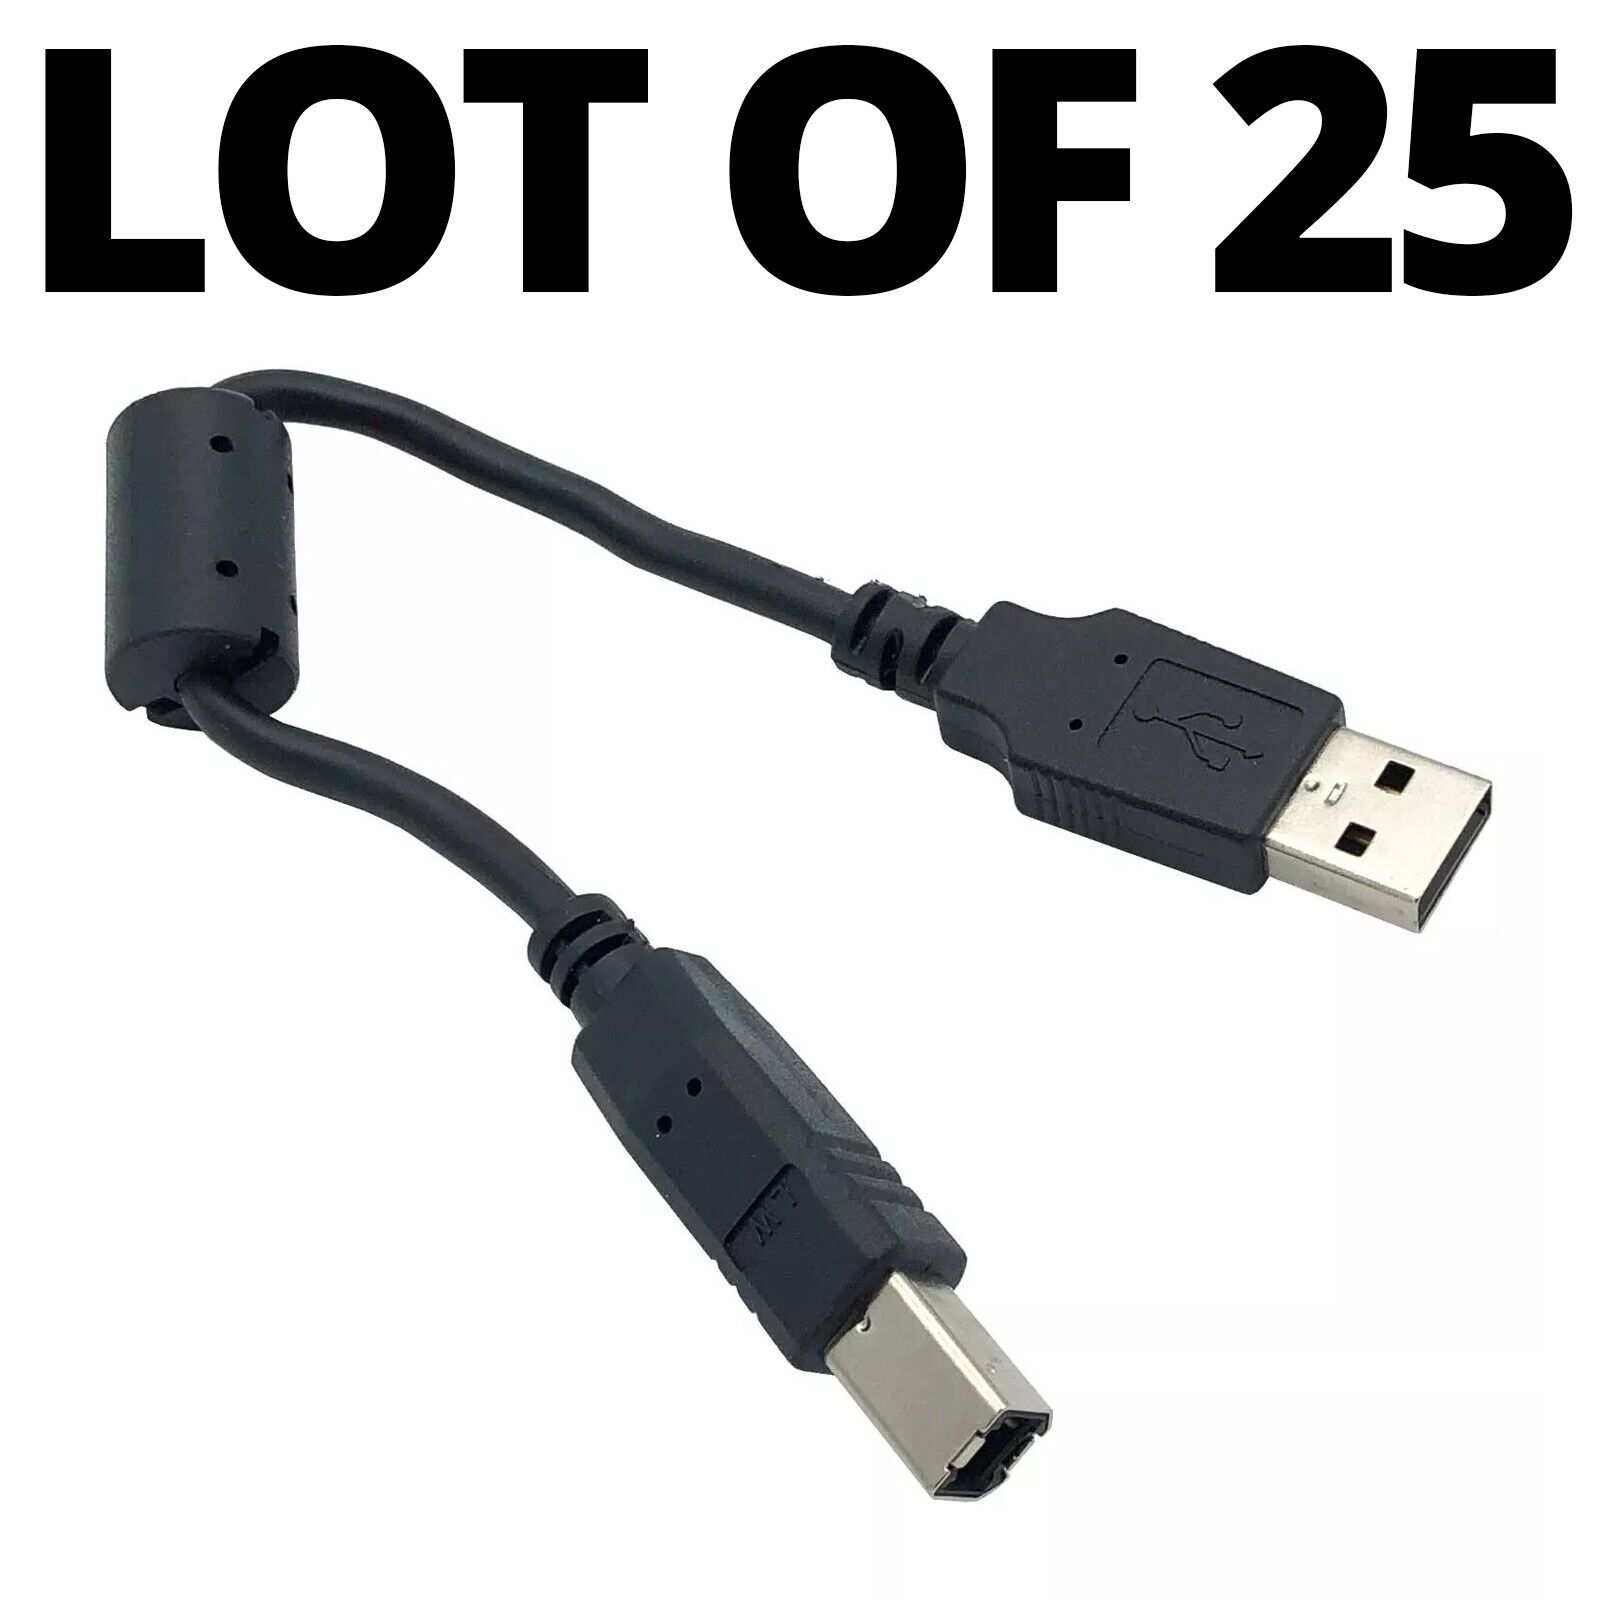 LOT of 25 USB 2.0 A to Type B Male Data Sync cable for PC Scanners Printers etc.